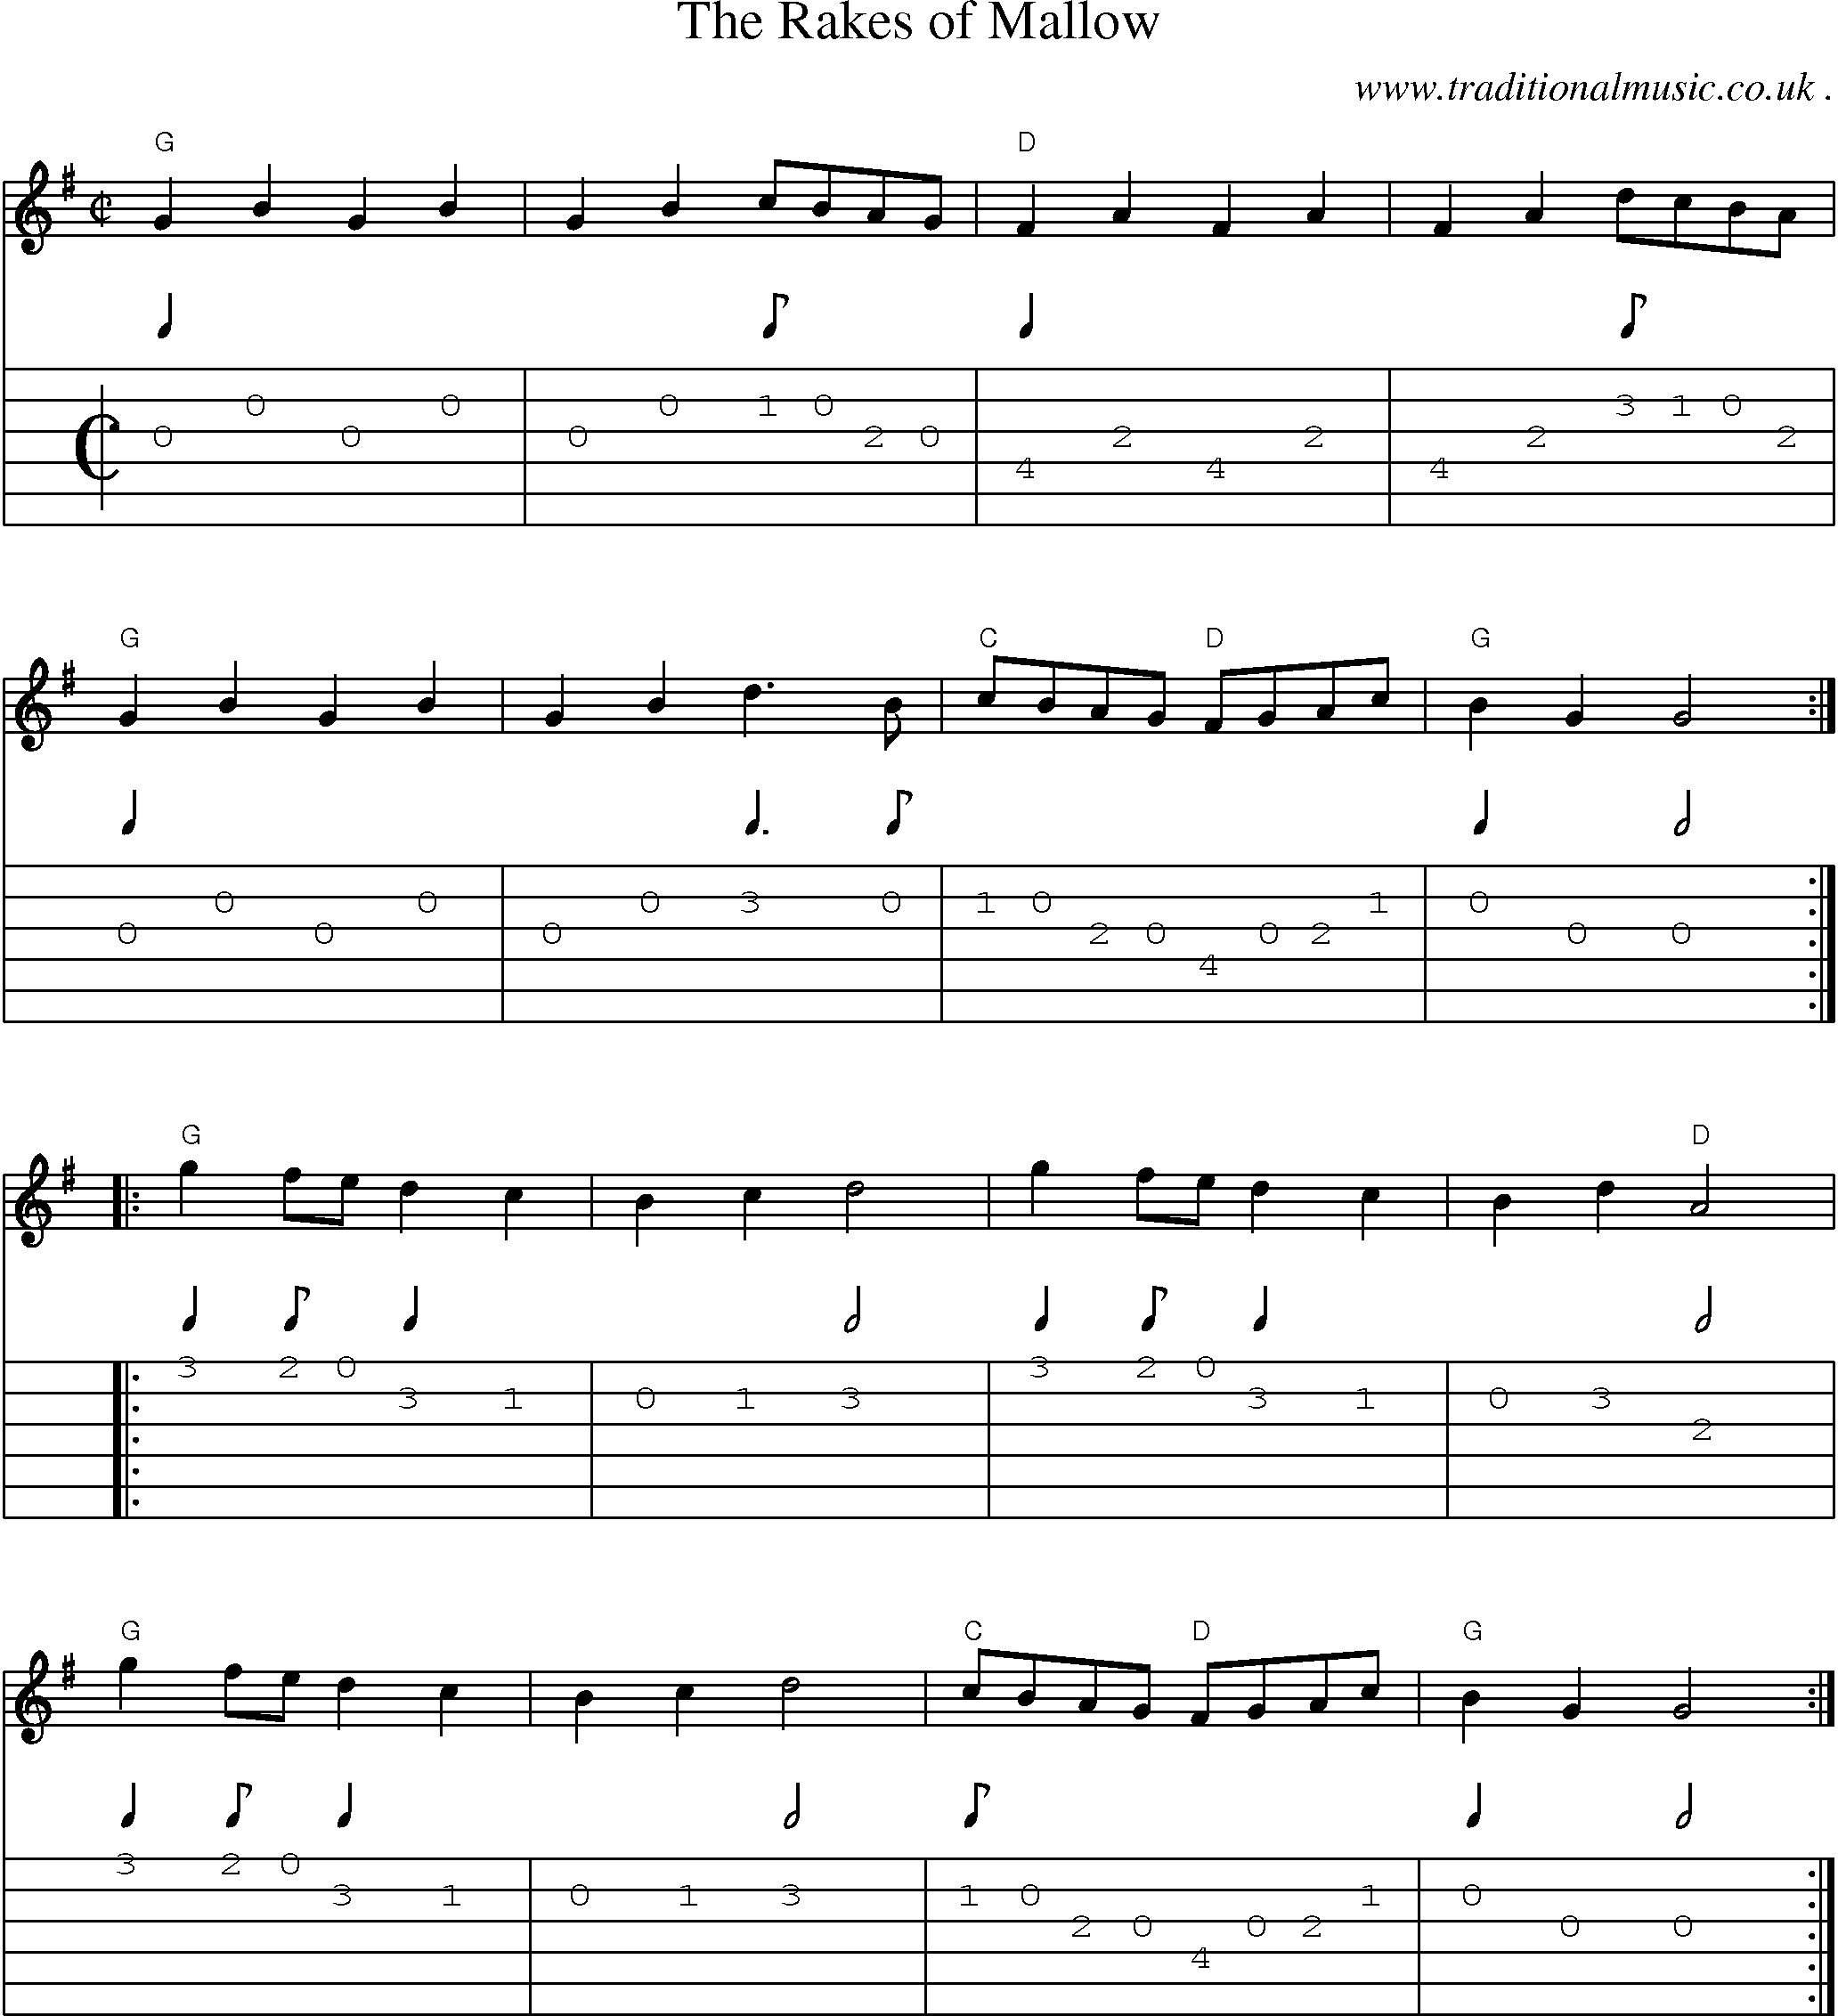 Music Score and Guitar Tabs for The Rakes Of Mallow